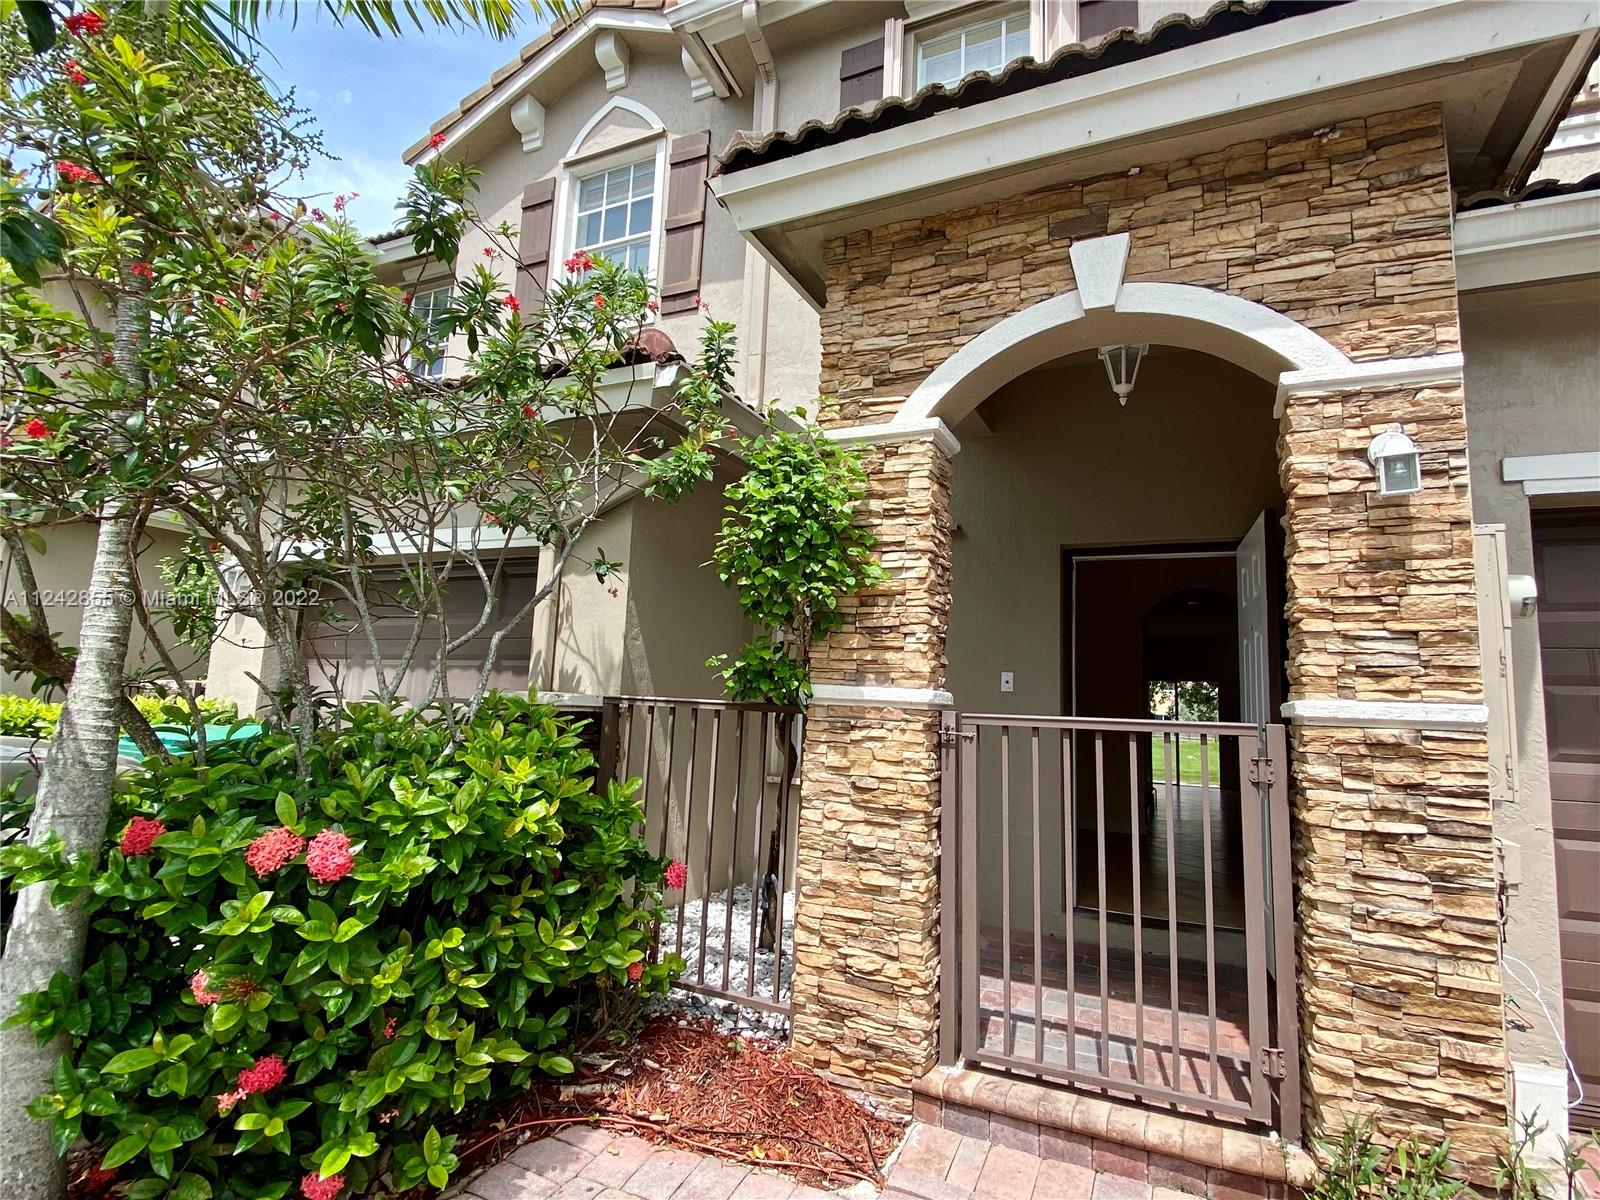 Beautiful 3 bed 2 1/2 bath townhouse with patio and peaceful lakeviews. Perfect layout. 2 parking spaces + garage. Very pleasant gated community with beautiful pool, large fitness center, playground in Cutler Bay. Perfectly maintained. Close to shopping and entertainment.